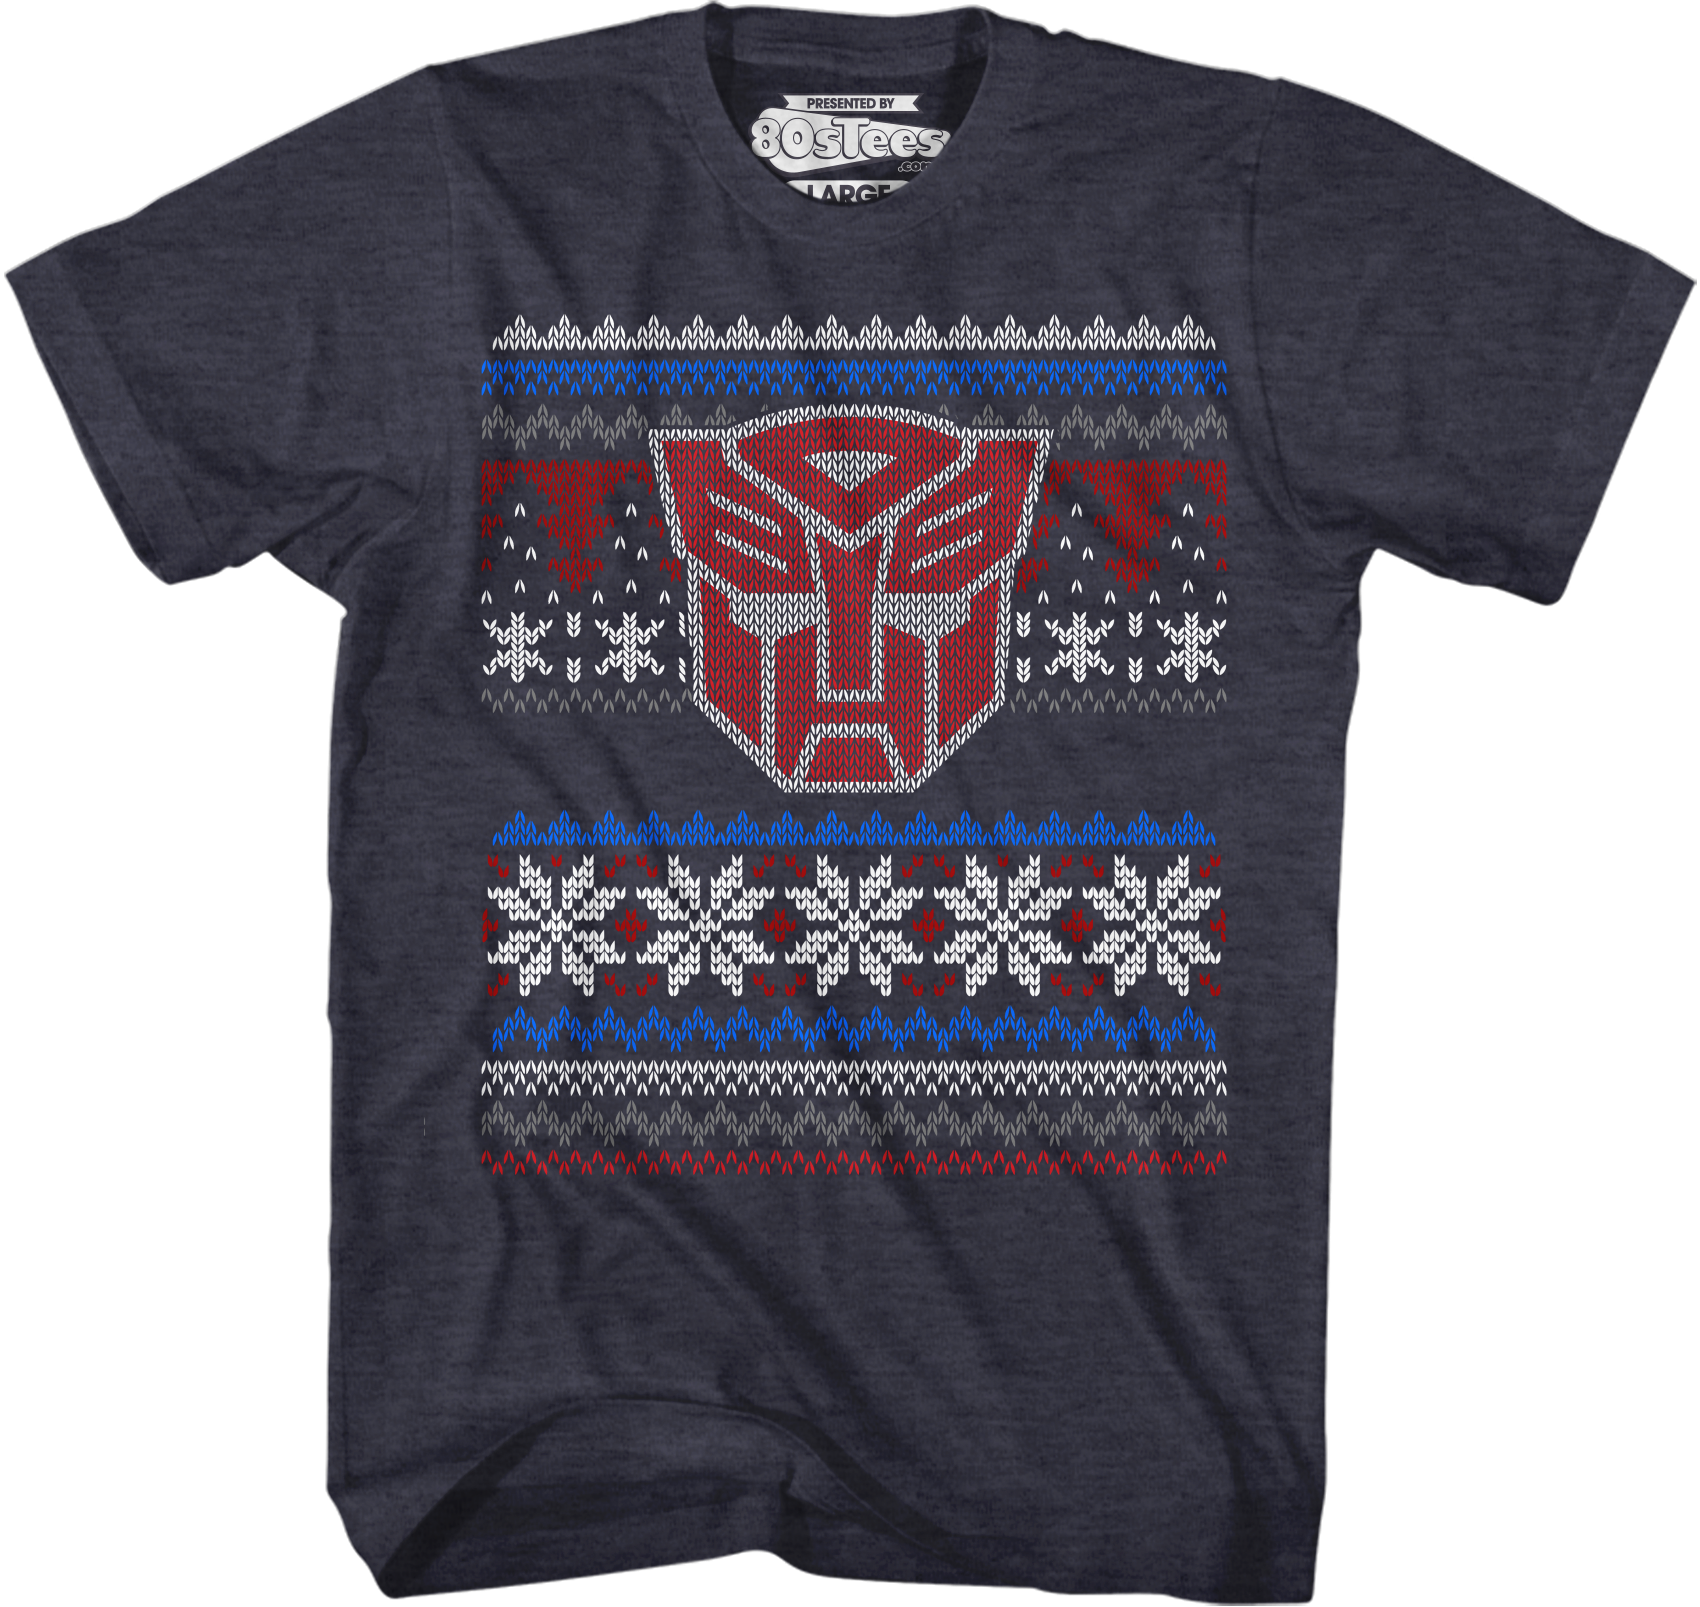 transformers ugly christmas sweater